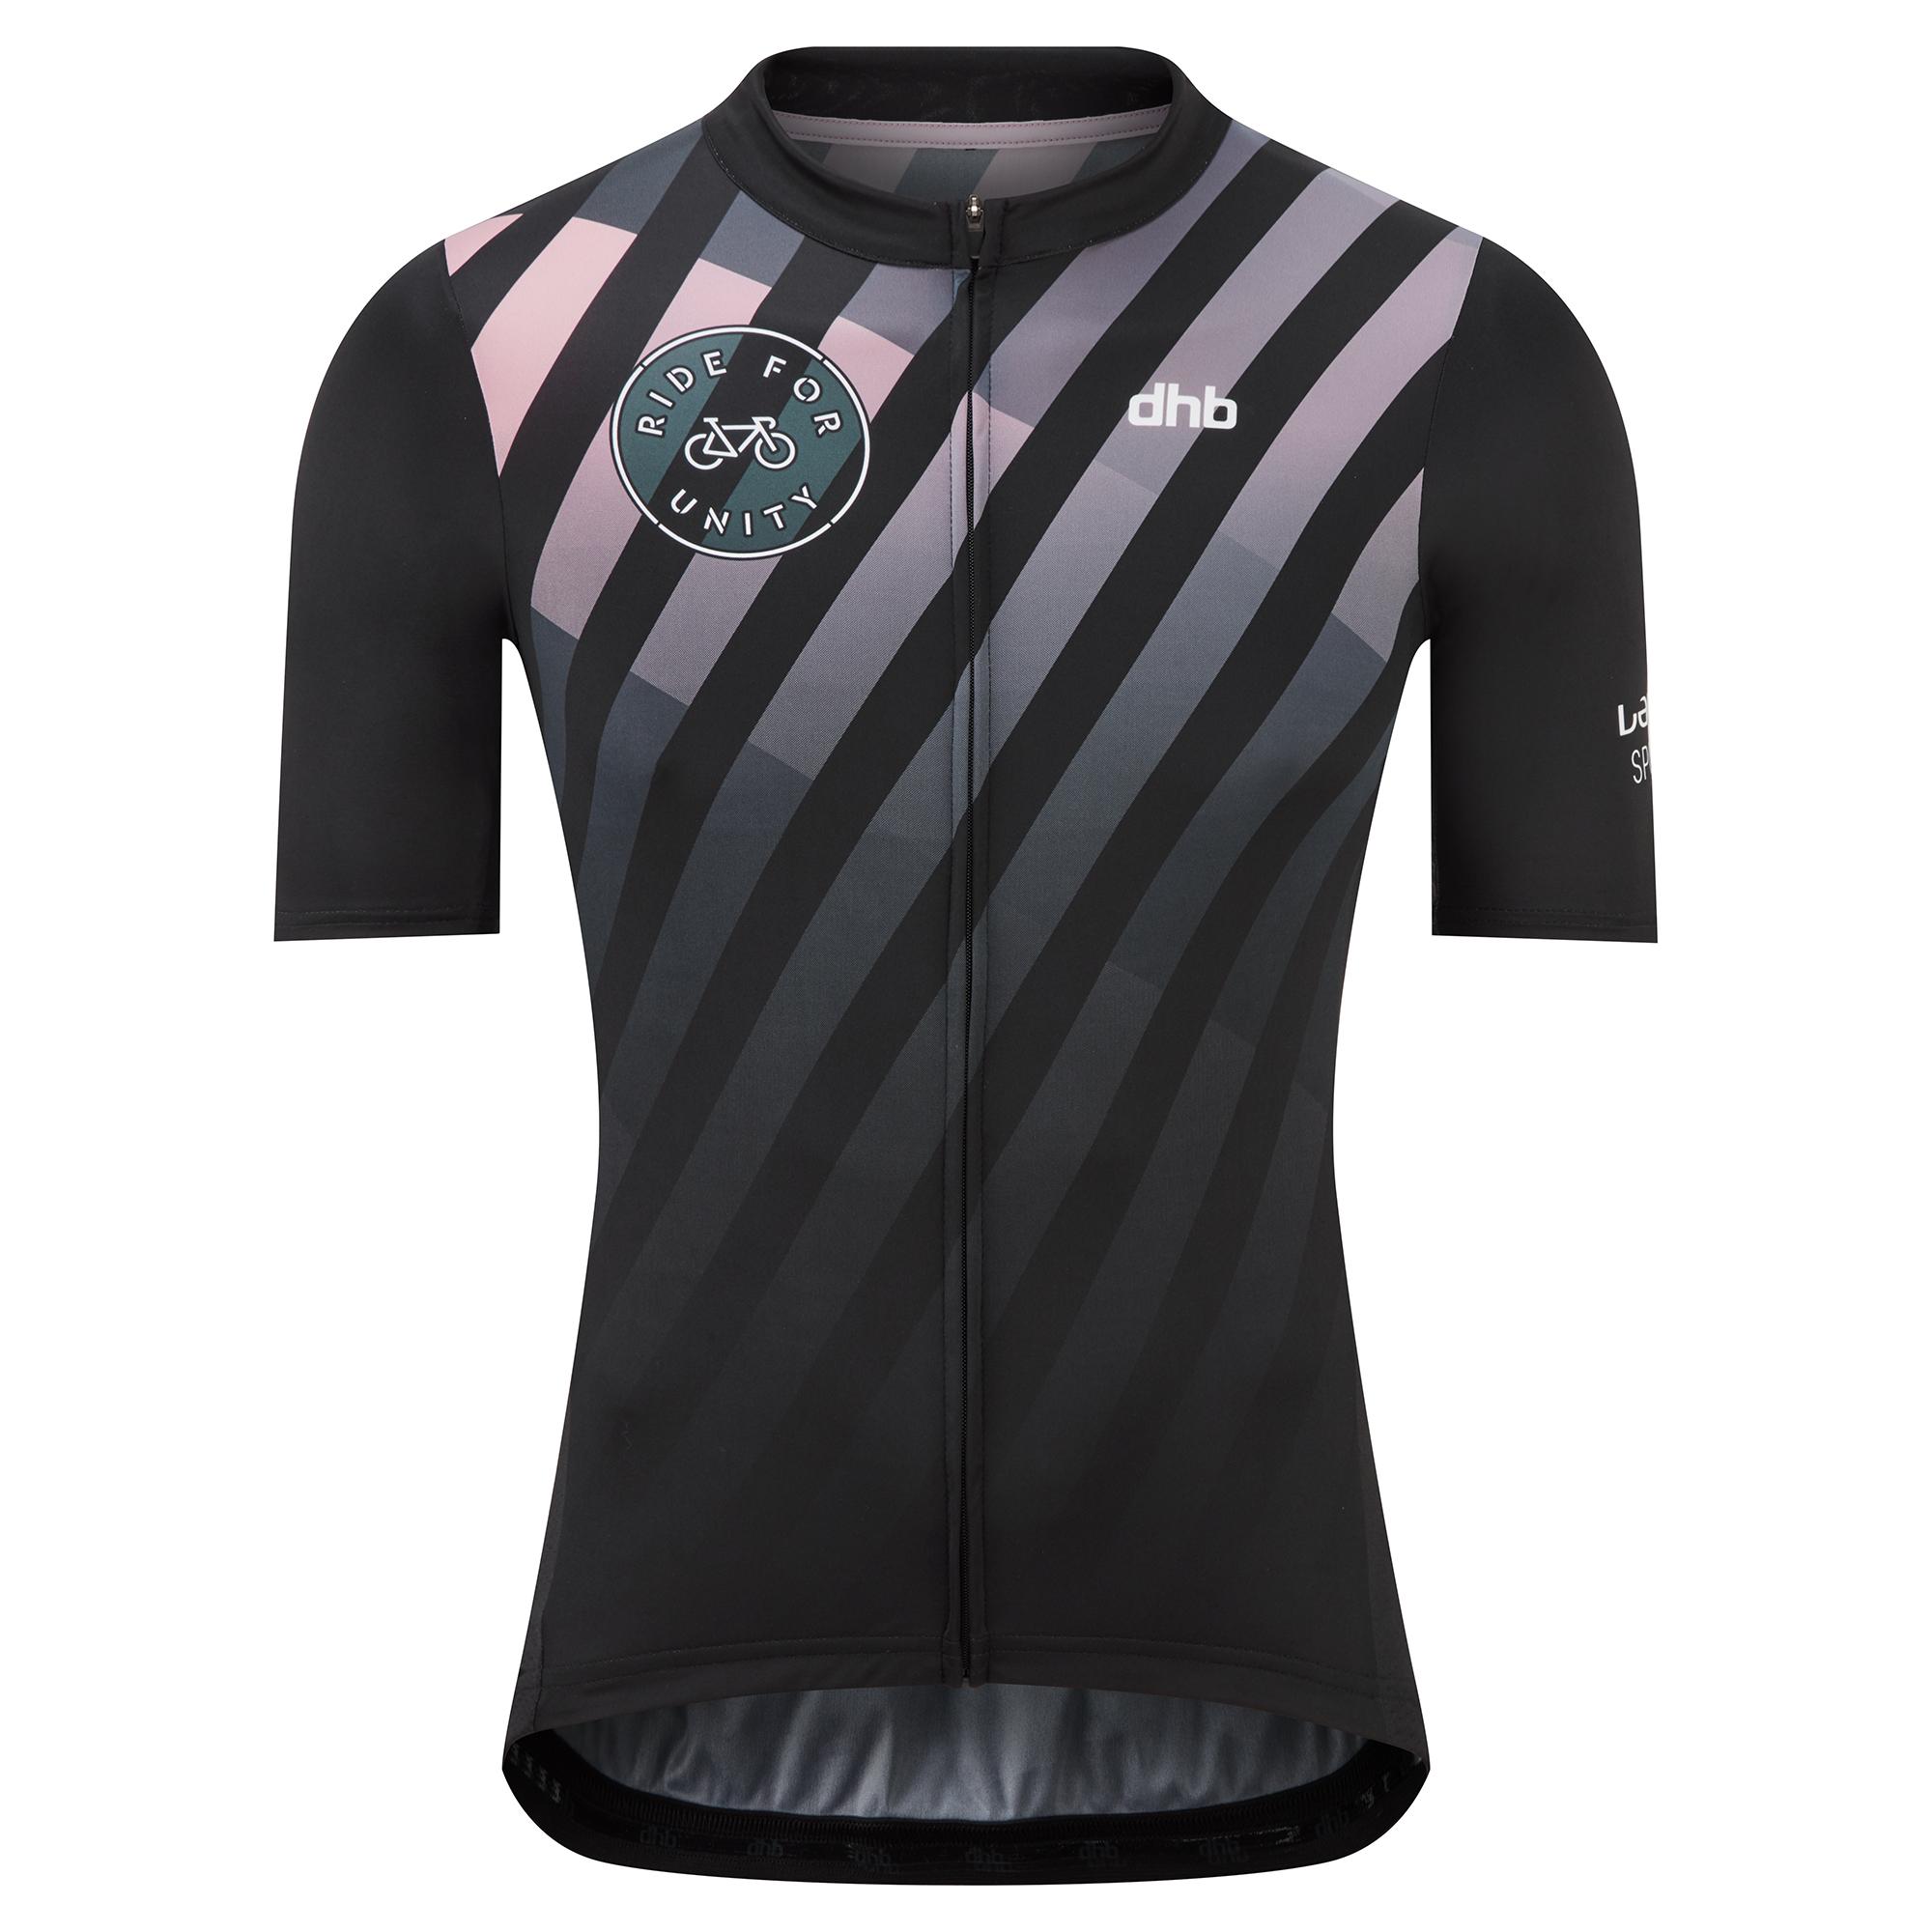 Dhb Ride For Unity Short Sleeve Jersey  Black/pink